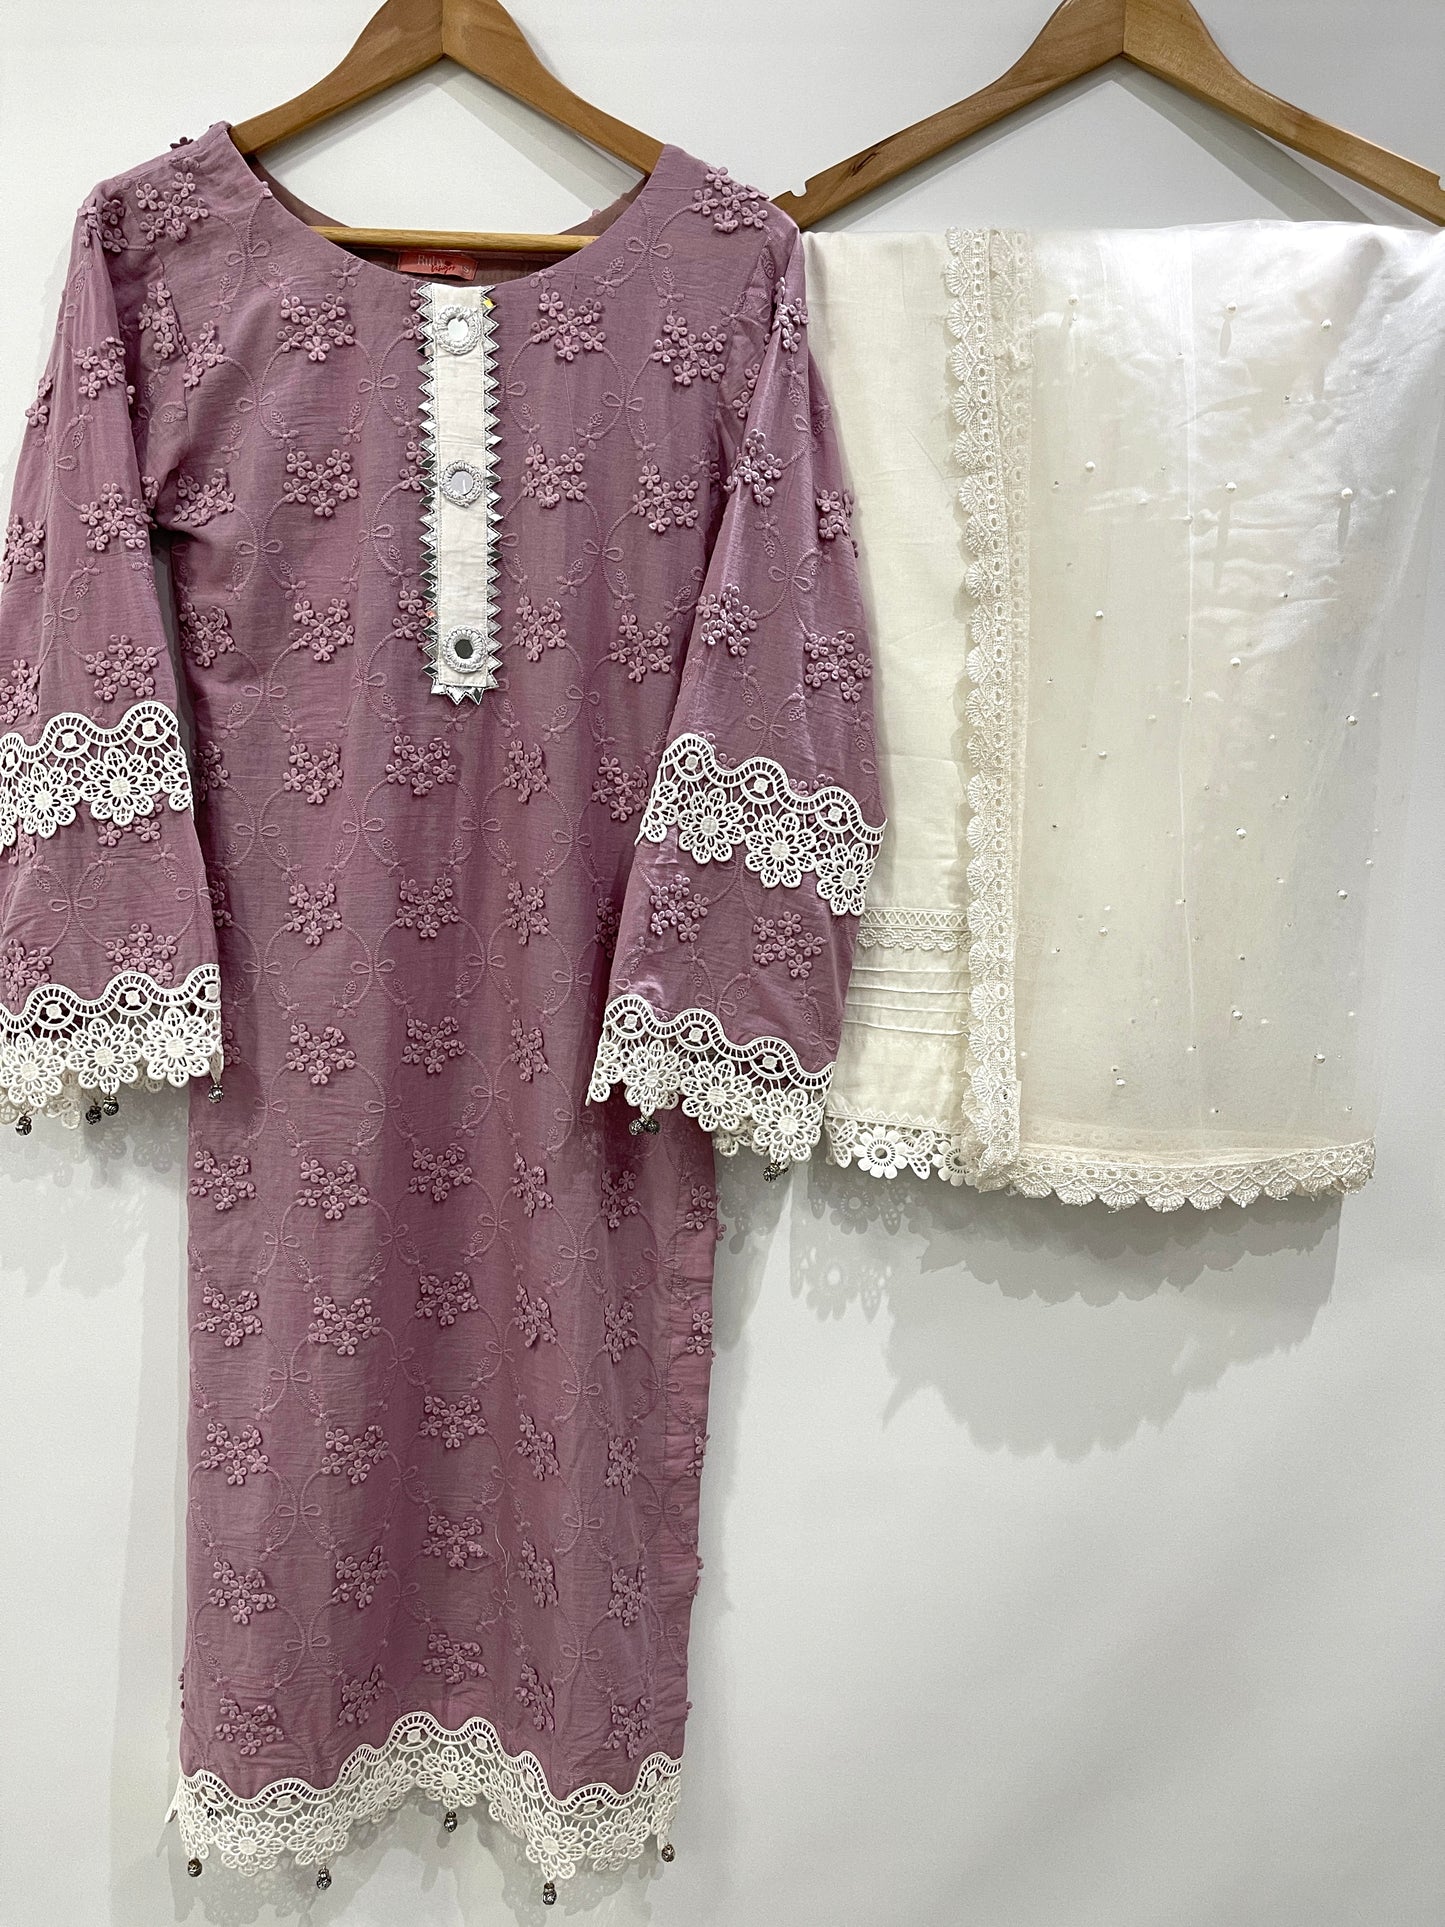 ALAYA - 3 Piece Lawn Suit with Lace and Mirror Details